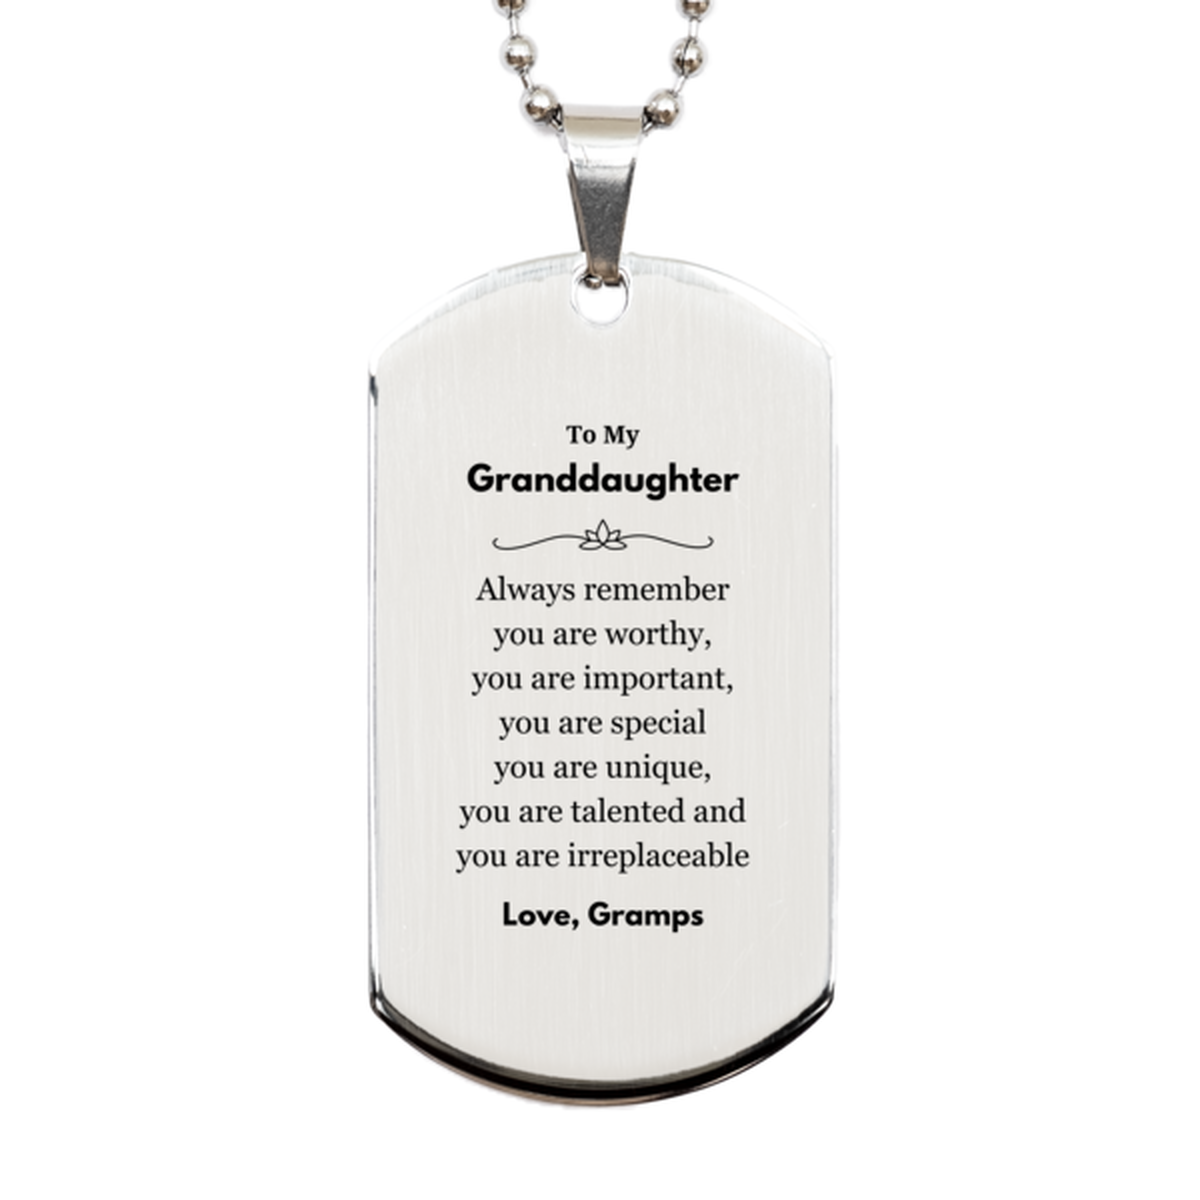 Granddaughter Birthday Gifts from Gramps, Inspirational Silver Dog Tag for Granddaughter Christmas Graduation Gifts for Granddaughter Always remember you are worthy, you are important. Love, Gramps